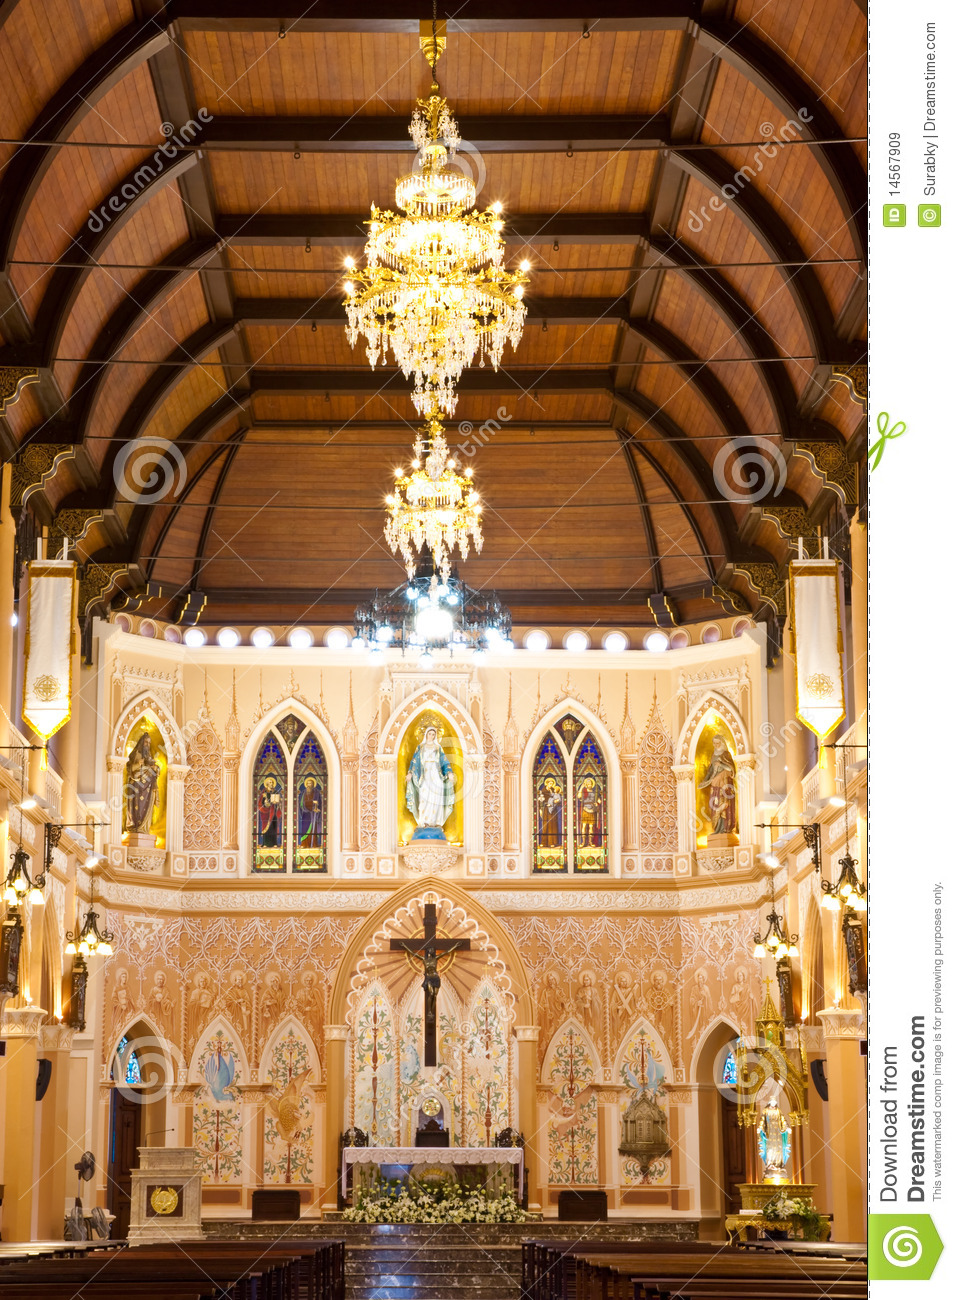 Over 100 Years Old Church In Thailand Royalty Free Stock Images